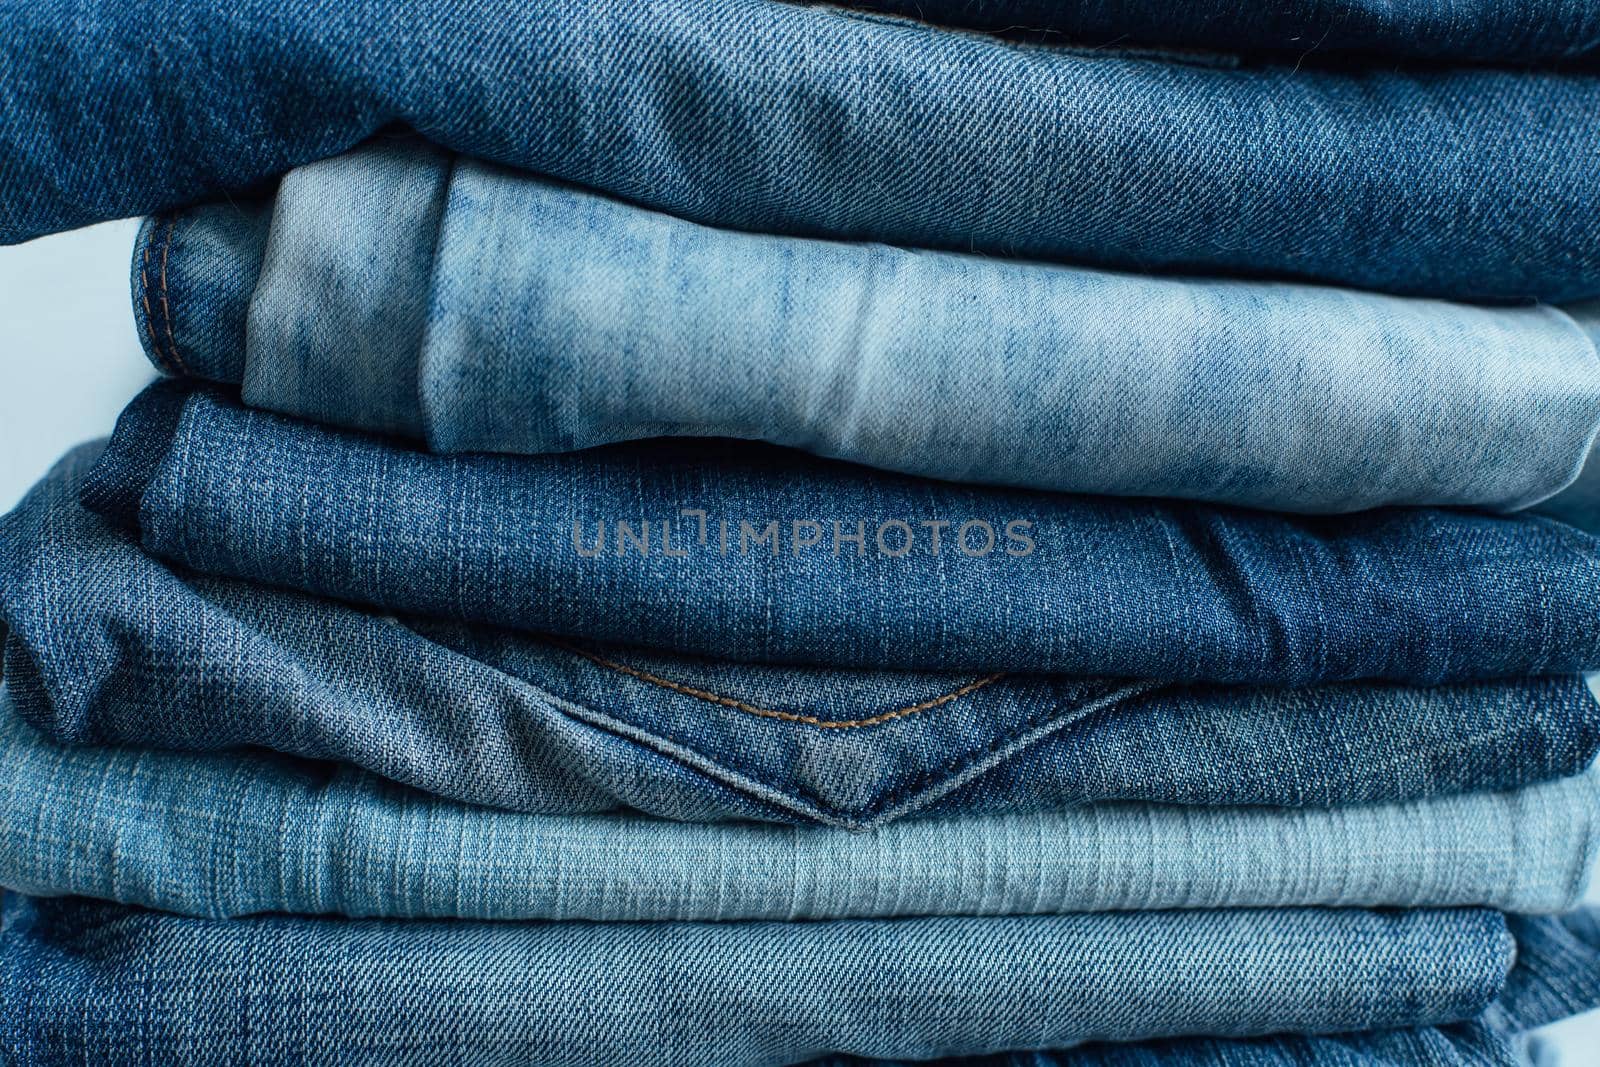 Stack of a stack of old jeans various shades of blue jeans. Denim jeans texture. Denim background texture for design. Canvas denim texture. by Smile19